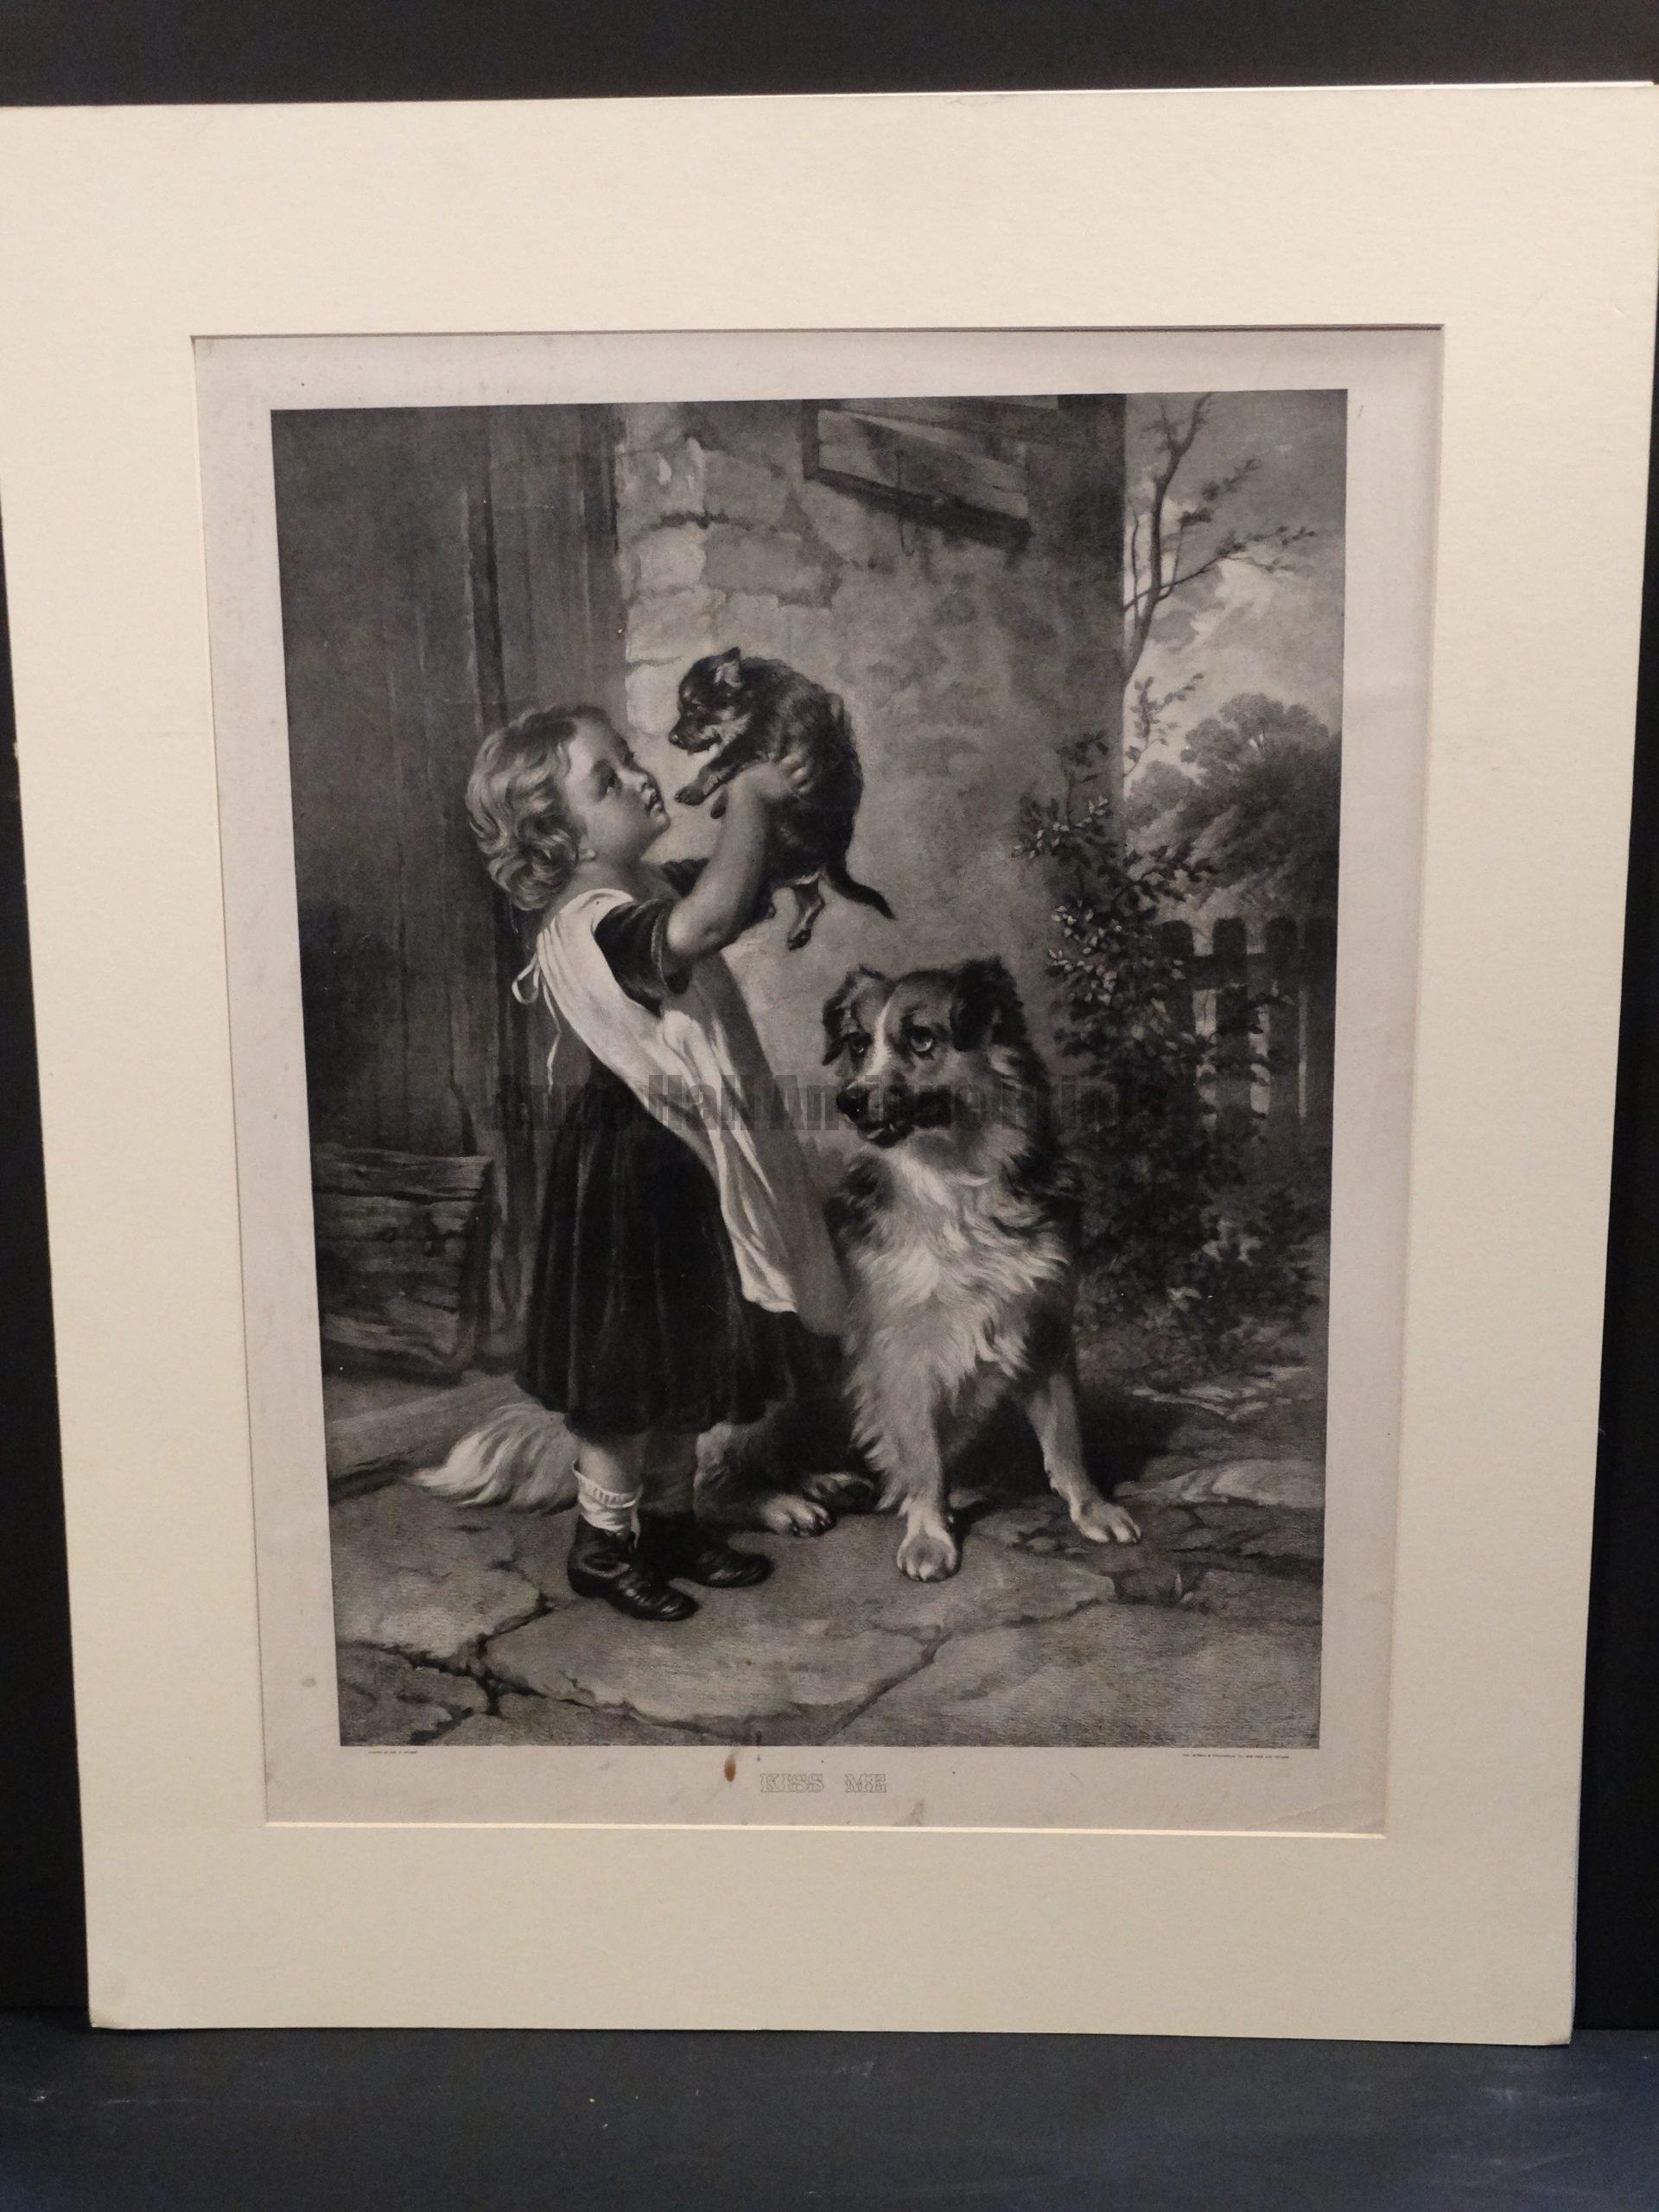 Kiss Me, Matted, Charming Antique Lithograph Dogs. Photolithograph, painted by Geo A Holmes. Published by the Crowell and Kirkpatrick Co. NY and Chicago.